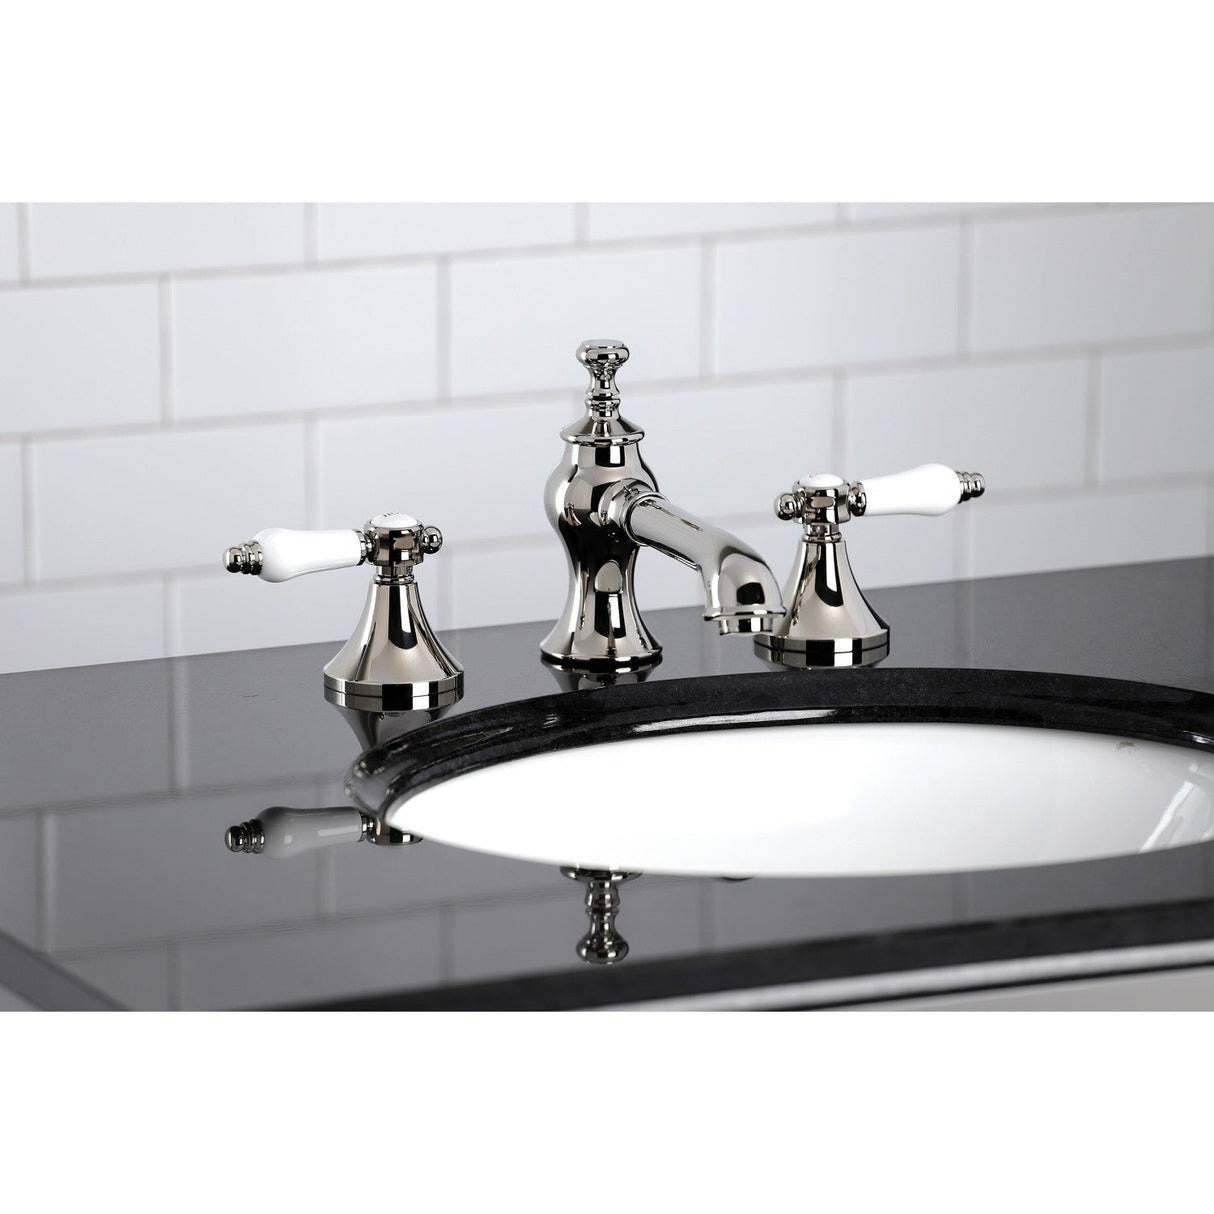 Bel-Air KC7066BPL Two-Handle 3-Hole Deck Mount Widespread Bathroom Faucet with Brass Pop-Up, Polished Nickel